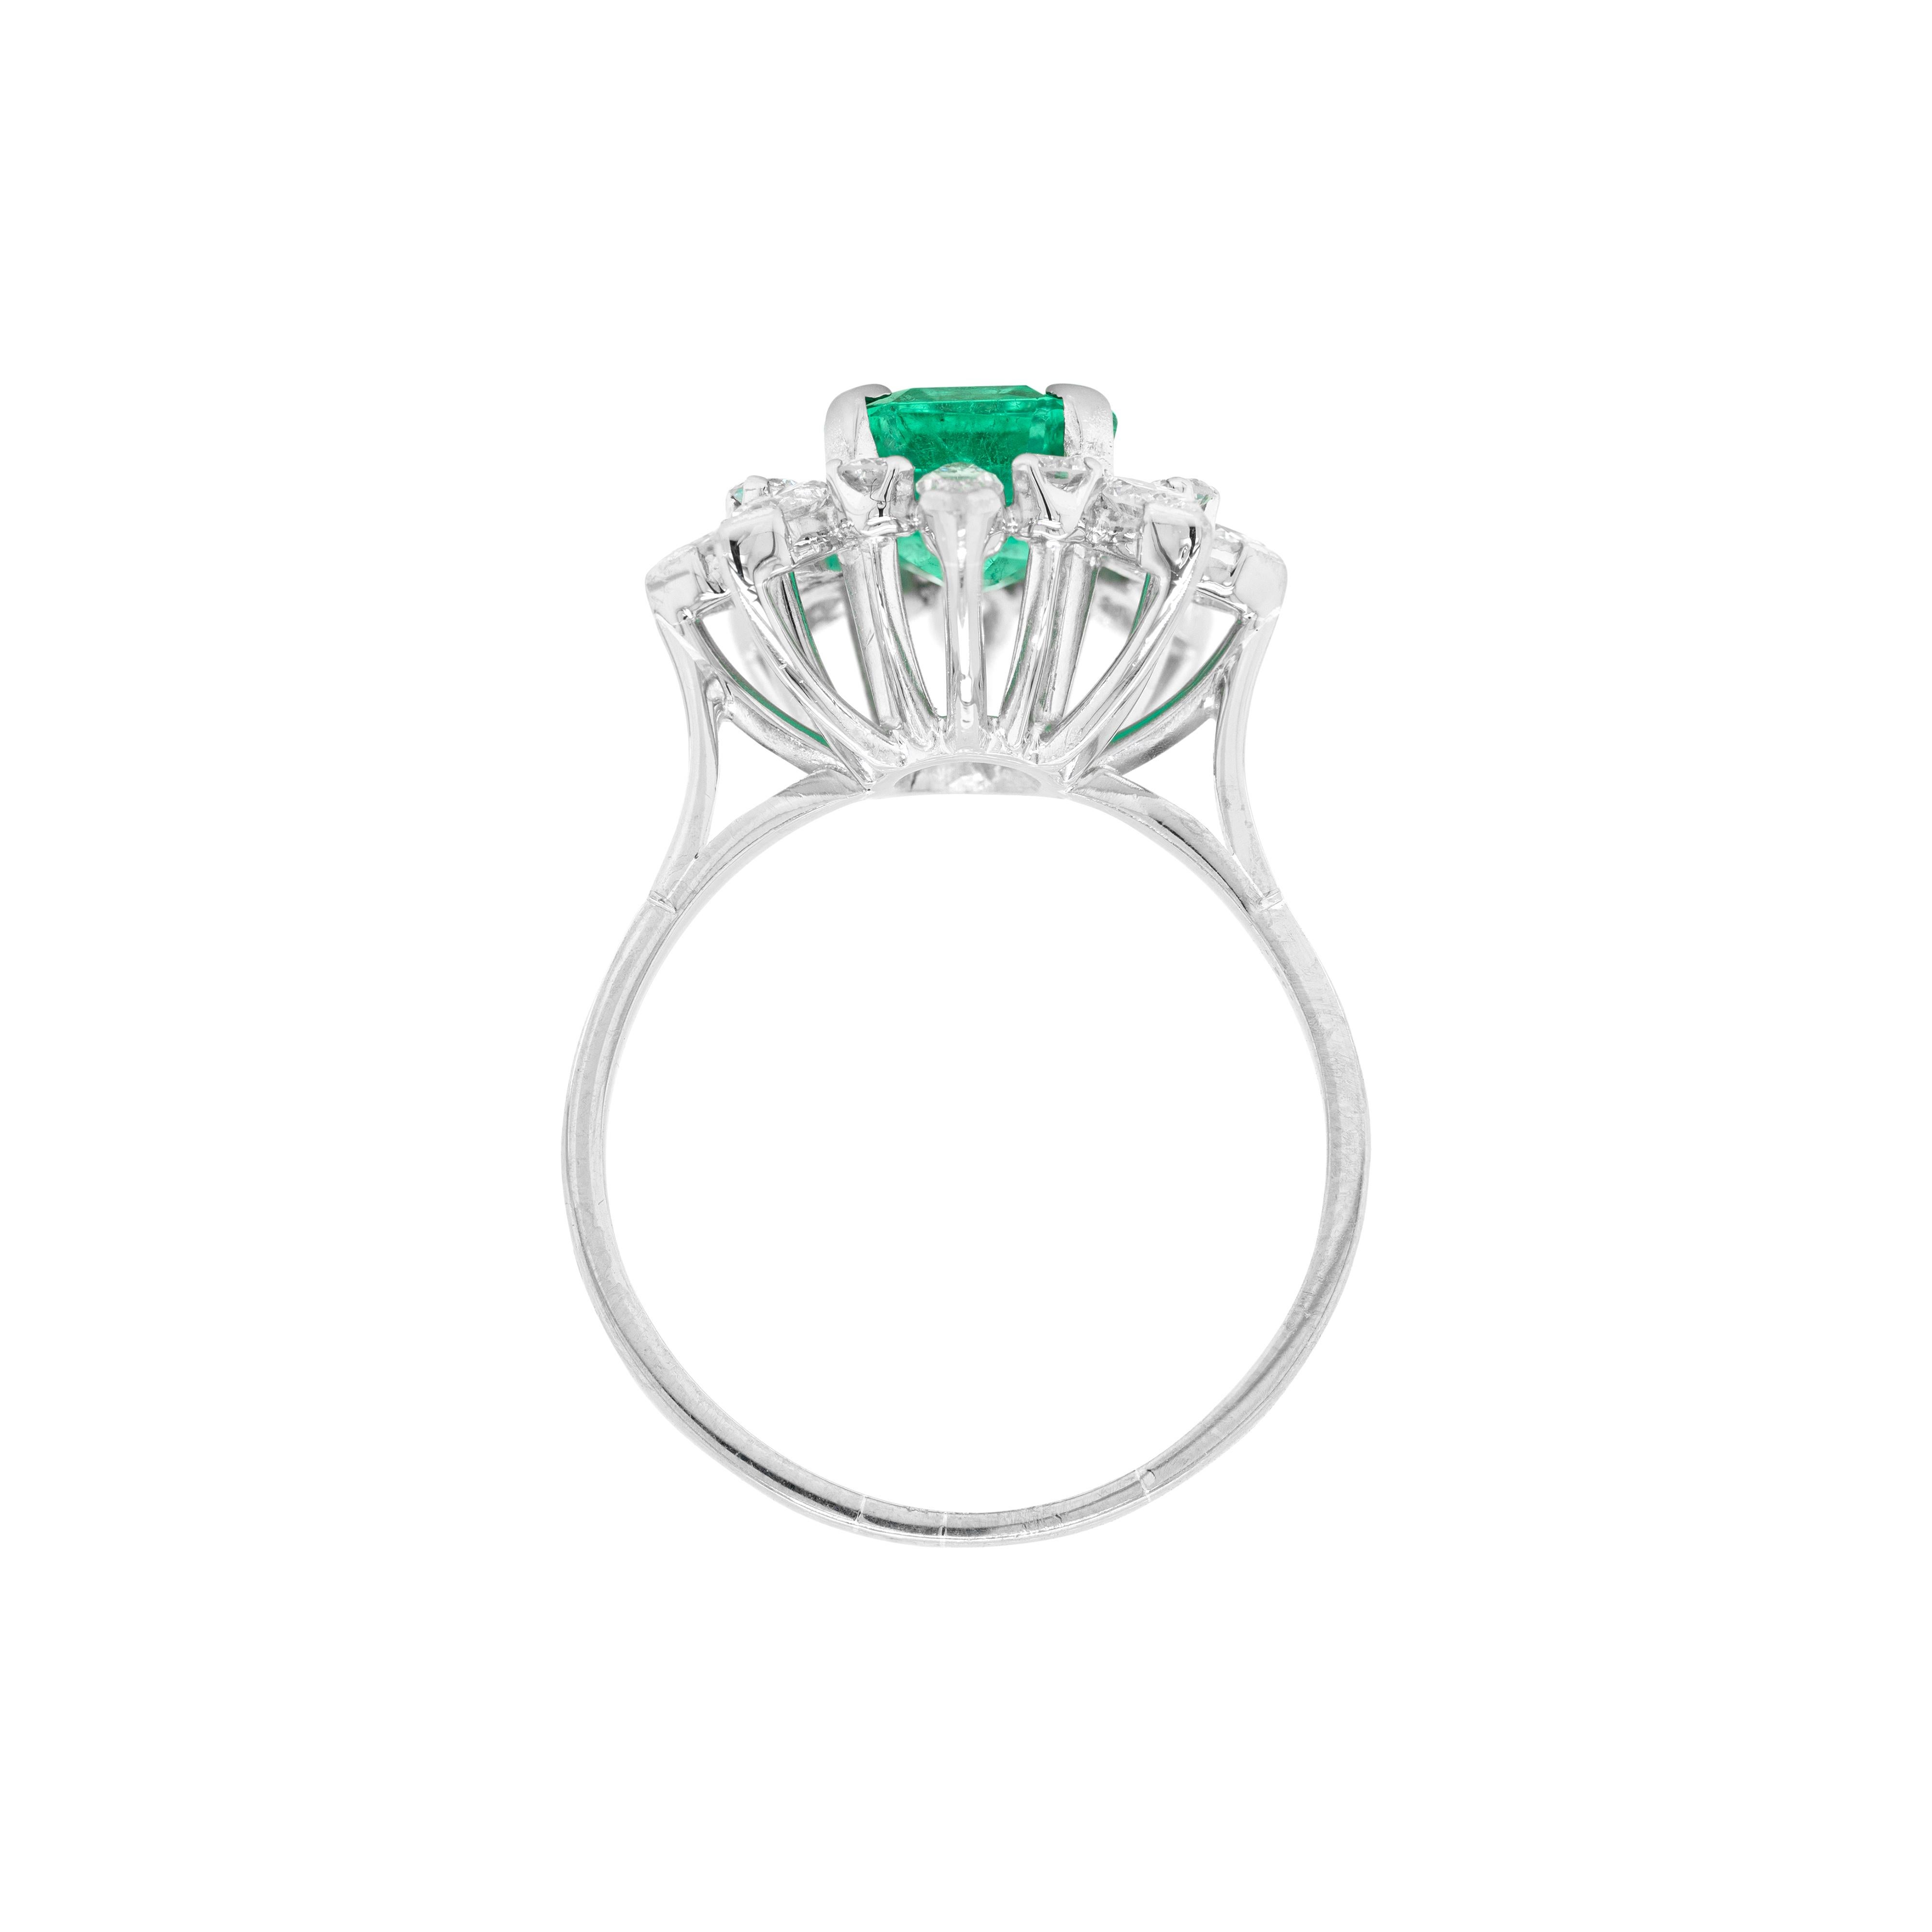 Retro 2.27ct Emerald and Diamond Cluster 18 Carat White Gold Engagement Ring, c. 1960s